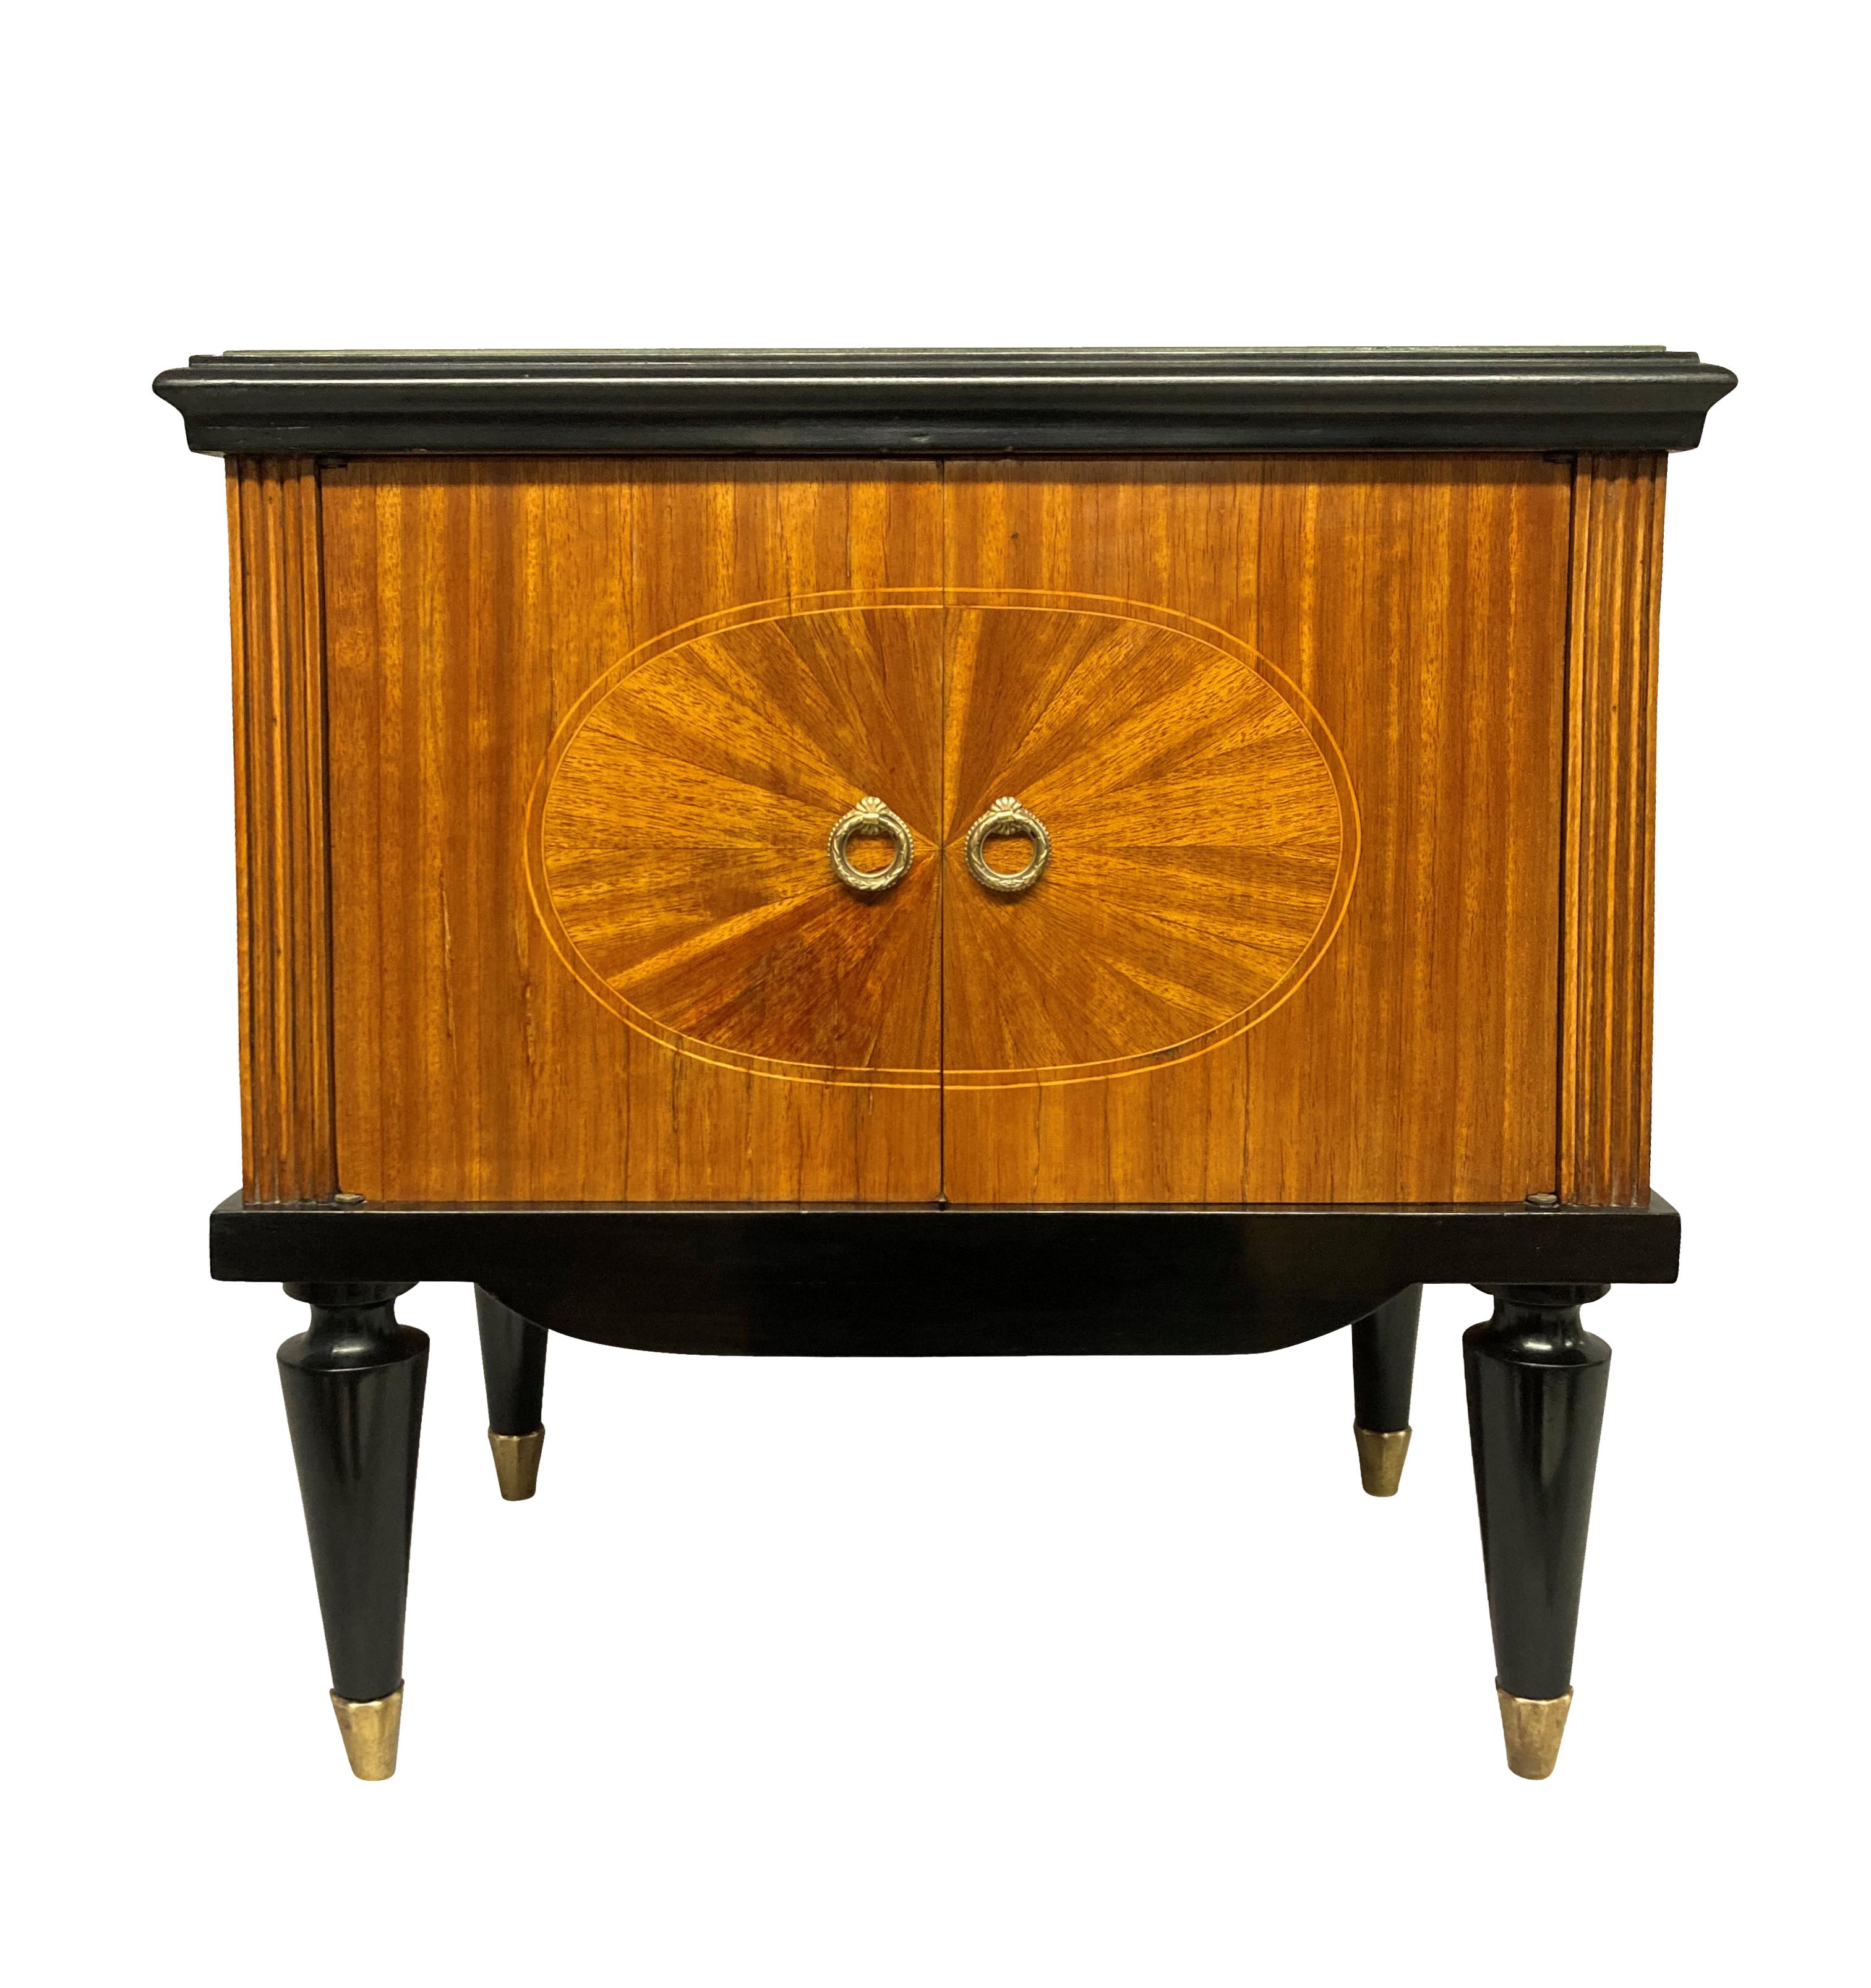 A pair of fine Italian Mid-Century night stands, finely veneered, with ebonised detailing throughout. With two doors and a cupboard inside, brass sabot and champagne coloured glass tops.